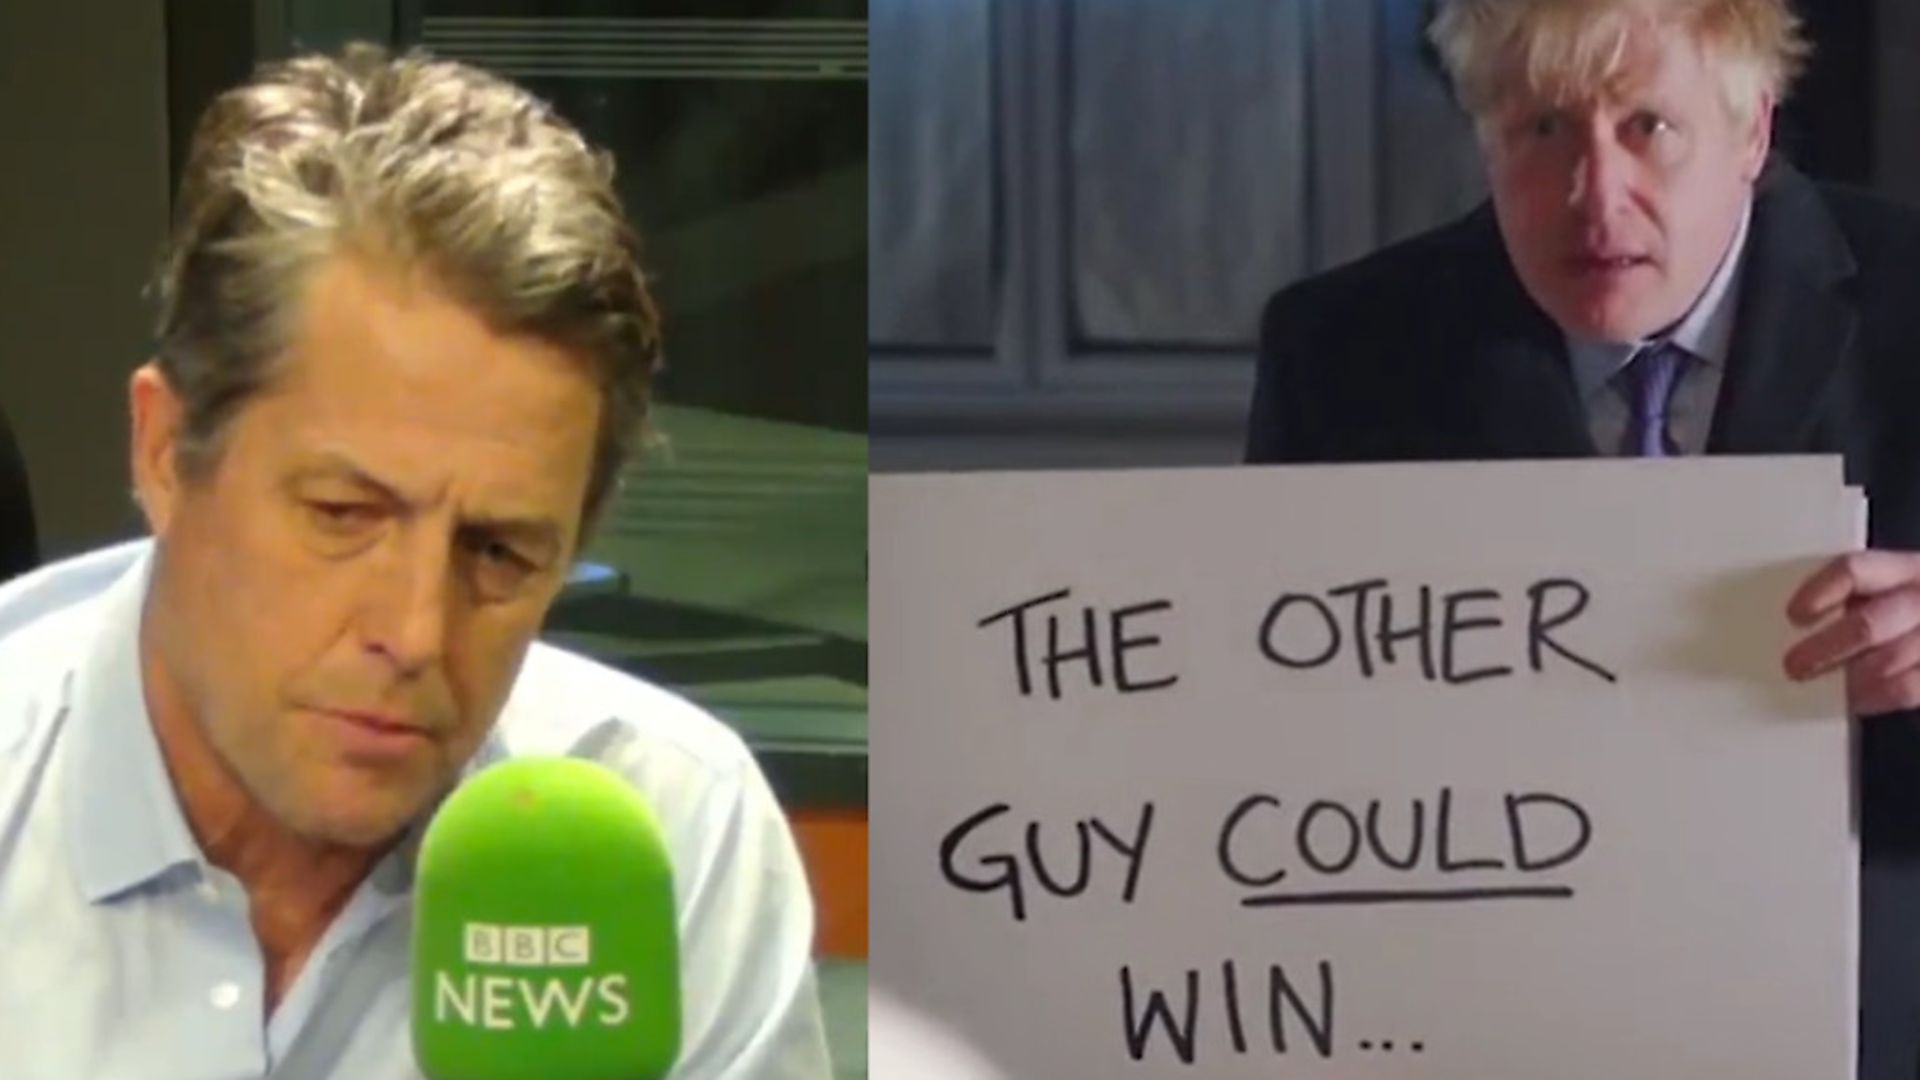 Hugh Grant had some choice words about Boris Johnson's spoof scene from Love, Actually. Pictures: BBC/Conservatives - Credit: BBC/Conservatives